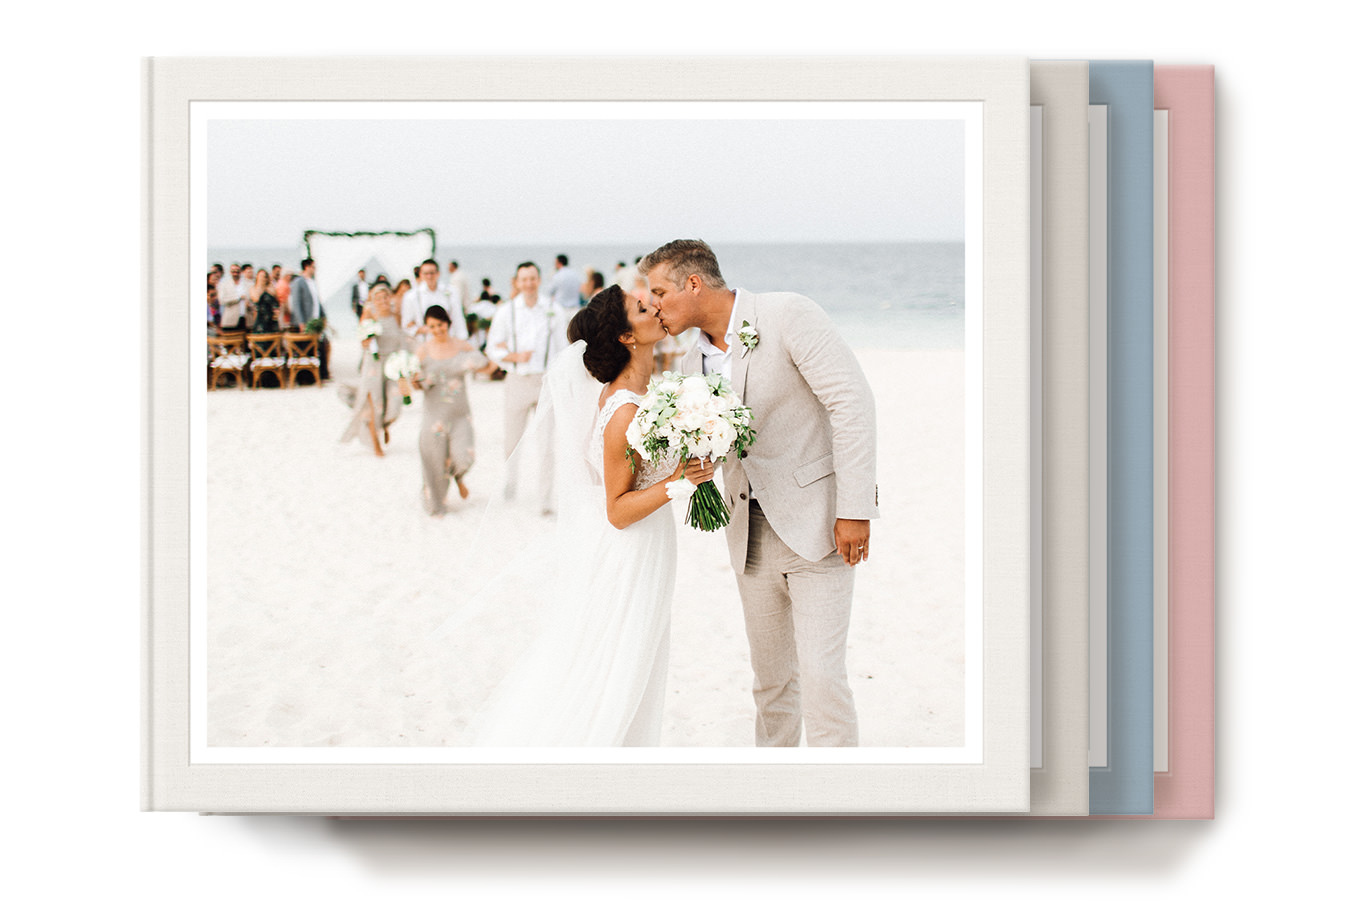 Stack of four classic photo albums showing fabric range. Cover image of a bride and groom on their wedding day